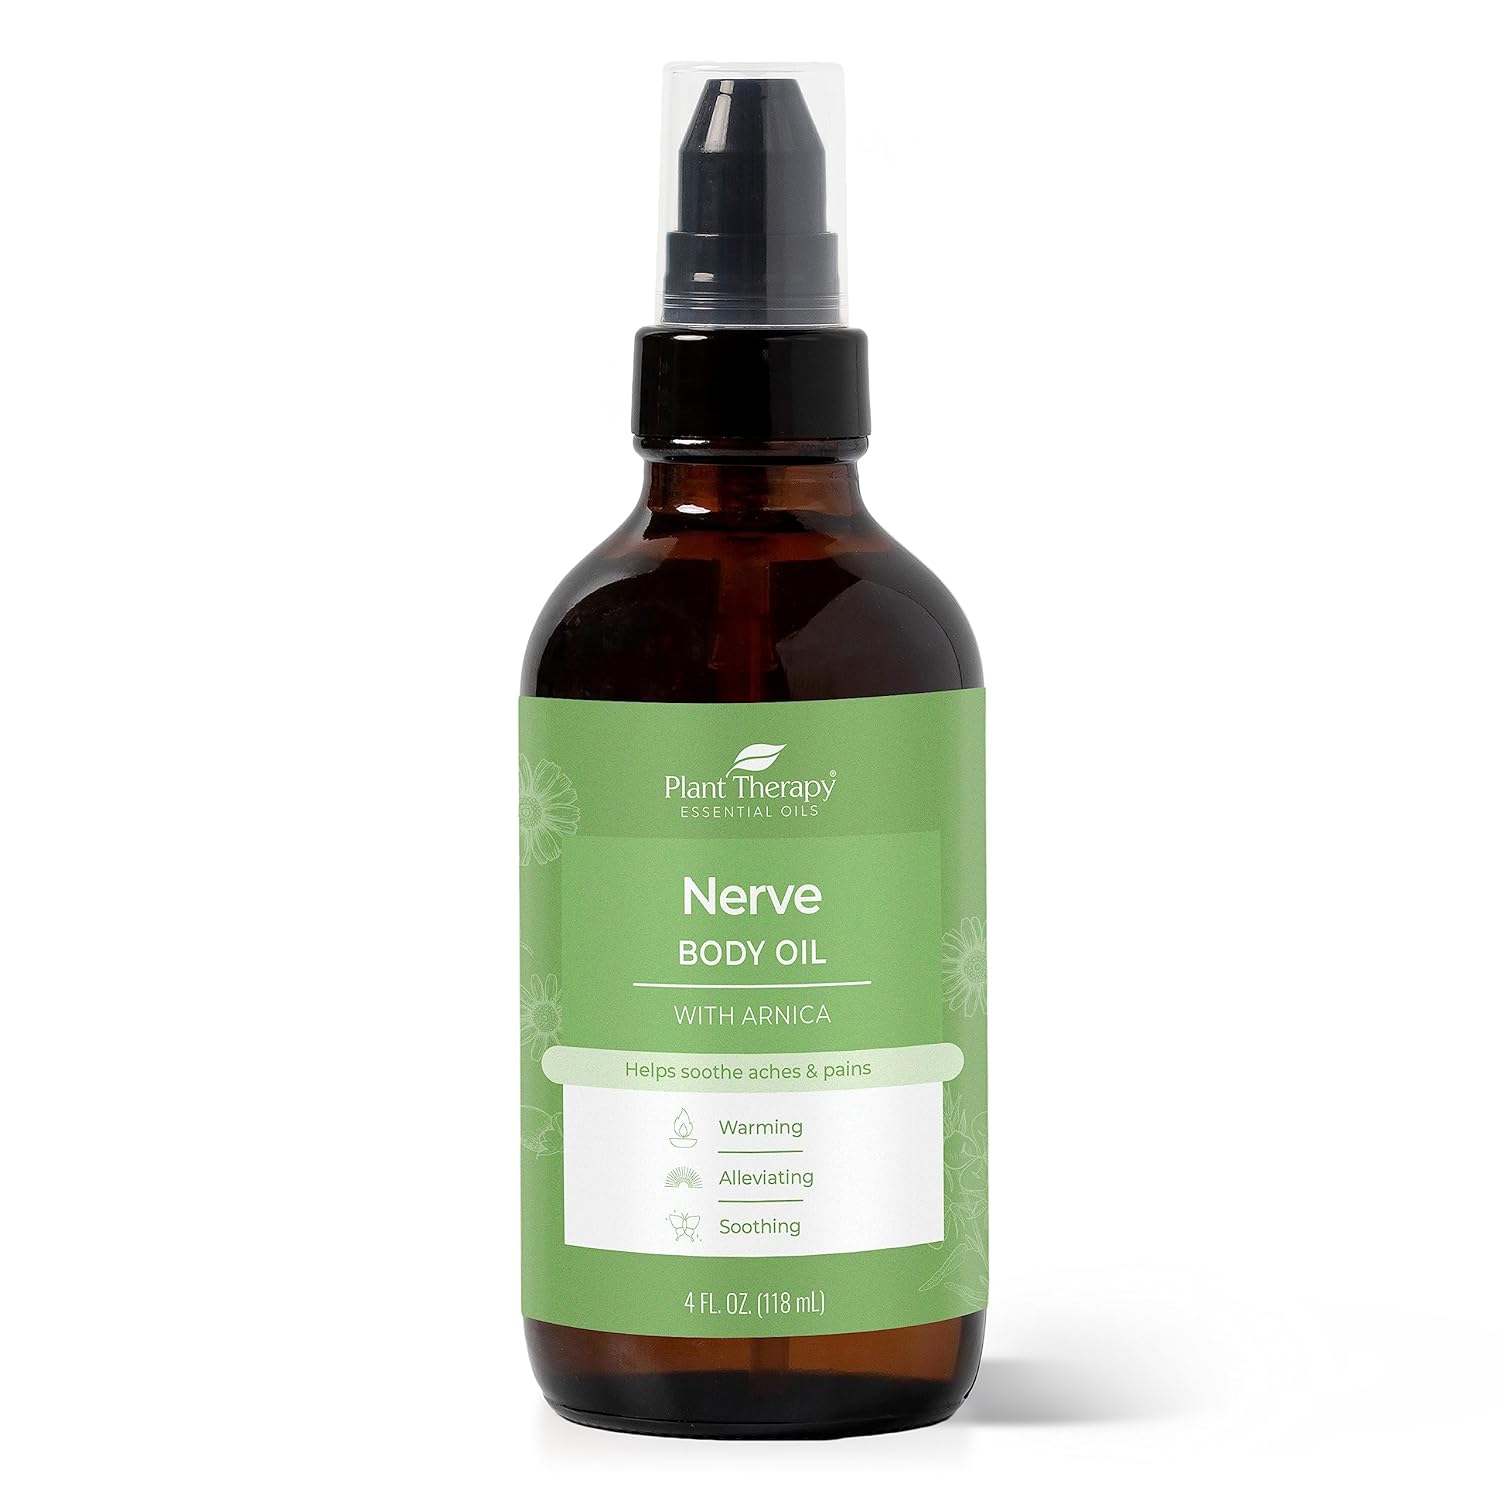 Plant Therapy Nerve Body Oil with Arnica 4 oz Supports Discomfort and Tenderness, Soothing for Sharp or Tingling Sensations, Softens & Nourishes Skin